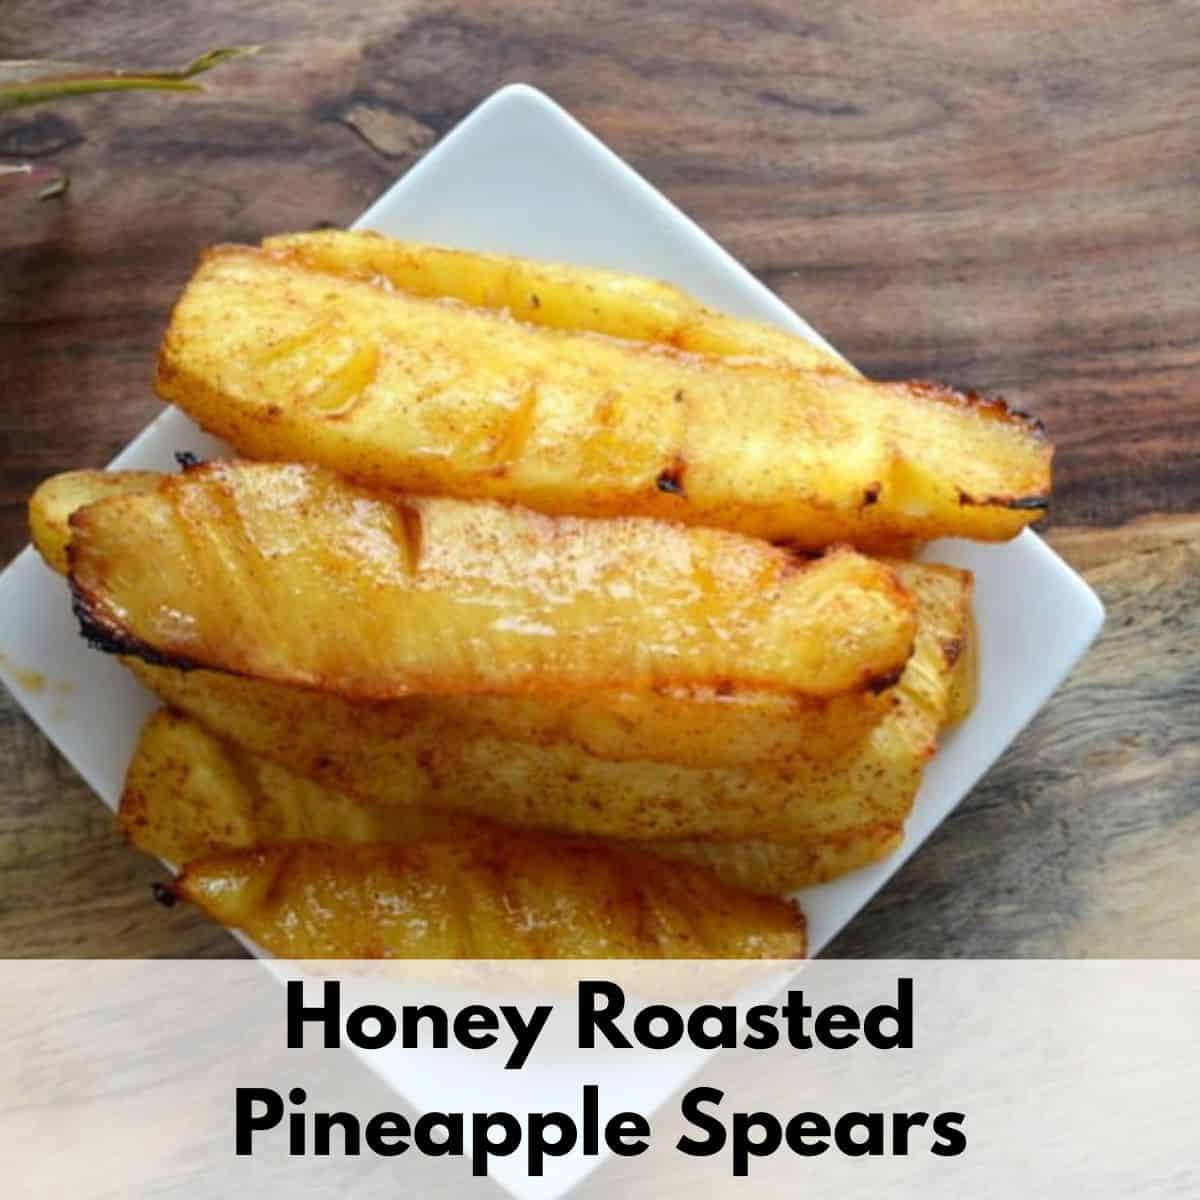 Text "honey roasted pineapple spears" over a picture of roasted pineapple spears on a white dish